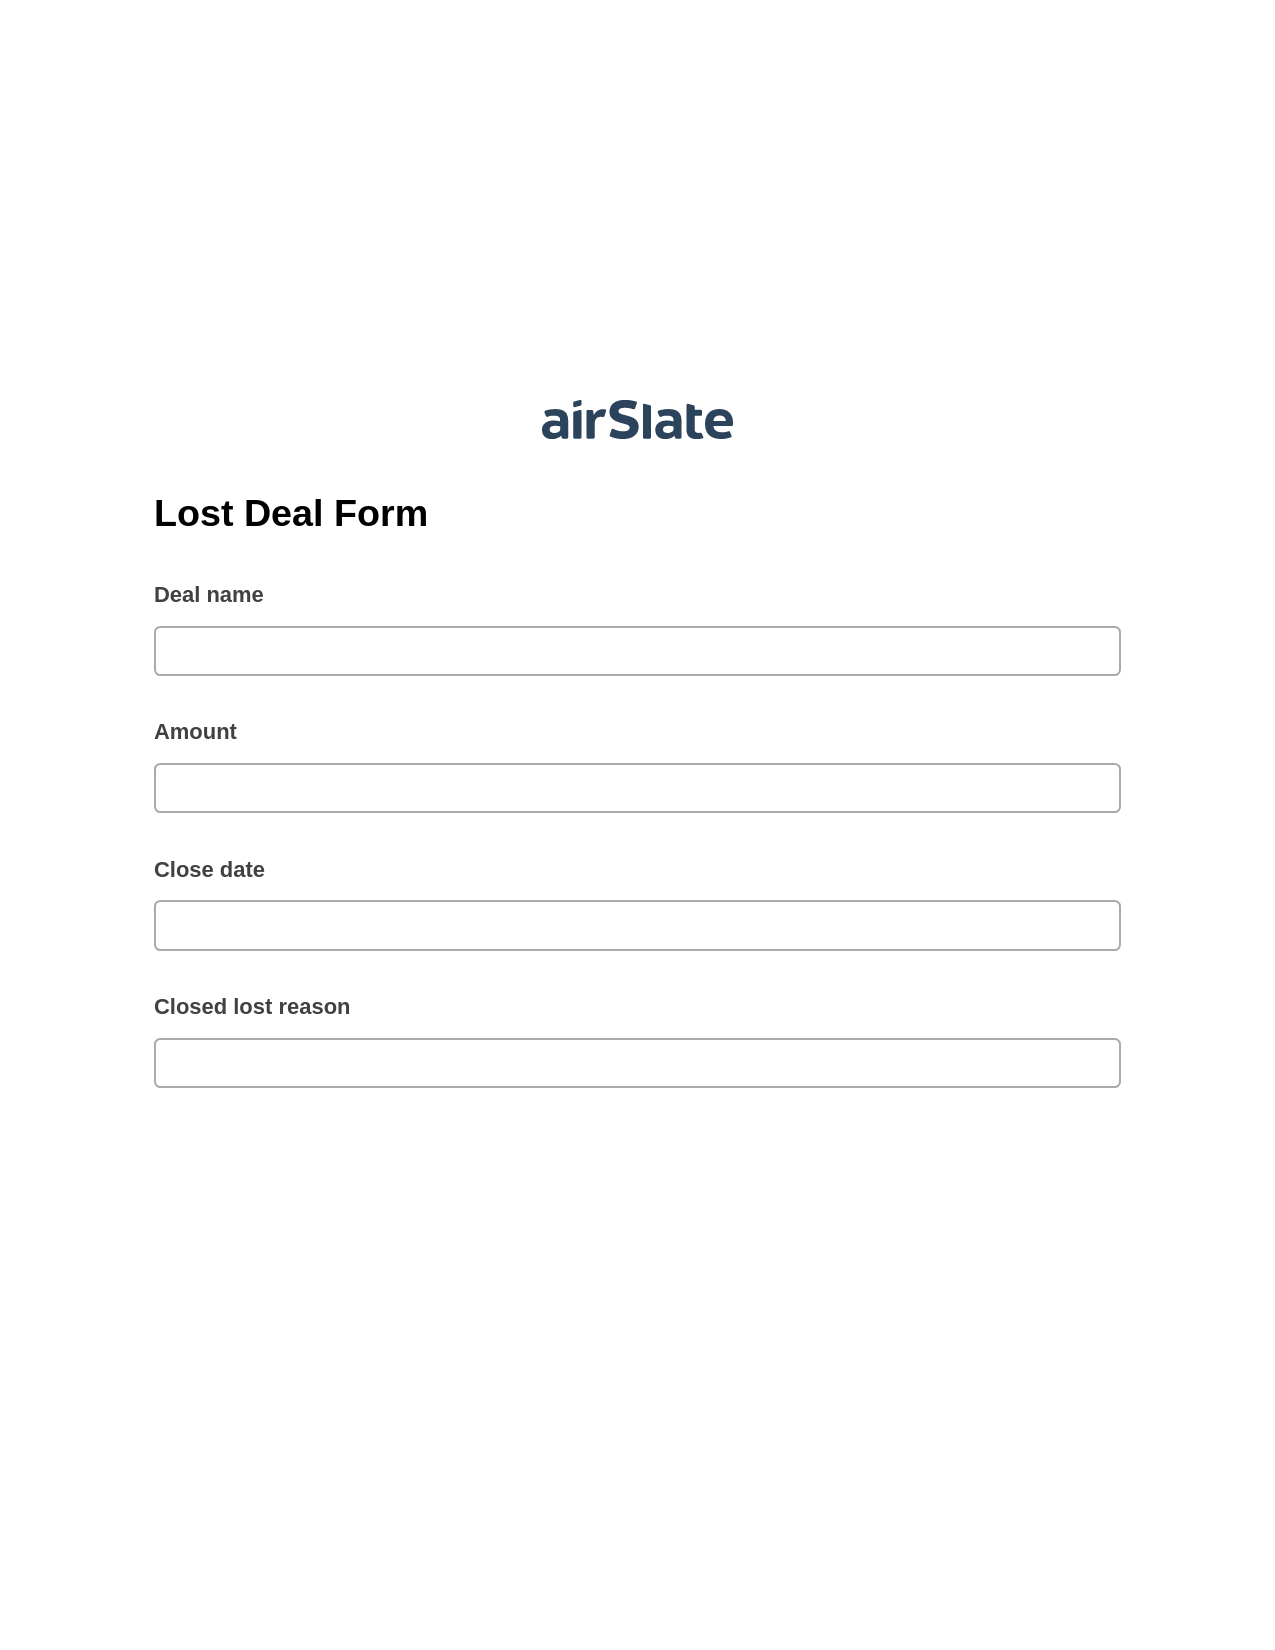 Lost Deal Form Pre-fill from Google Sheets Bot, Update MS Dynamics 365 Record Bot, Export to Smartsheet